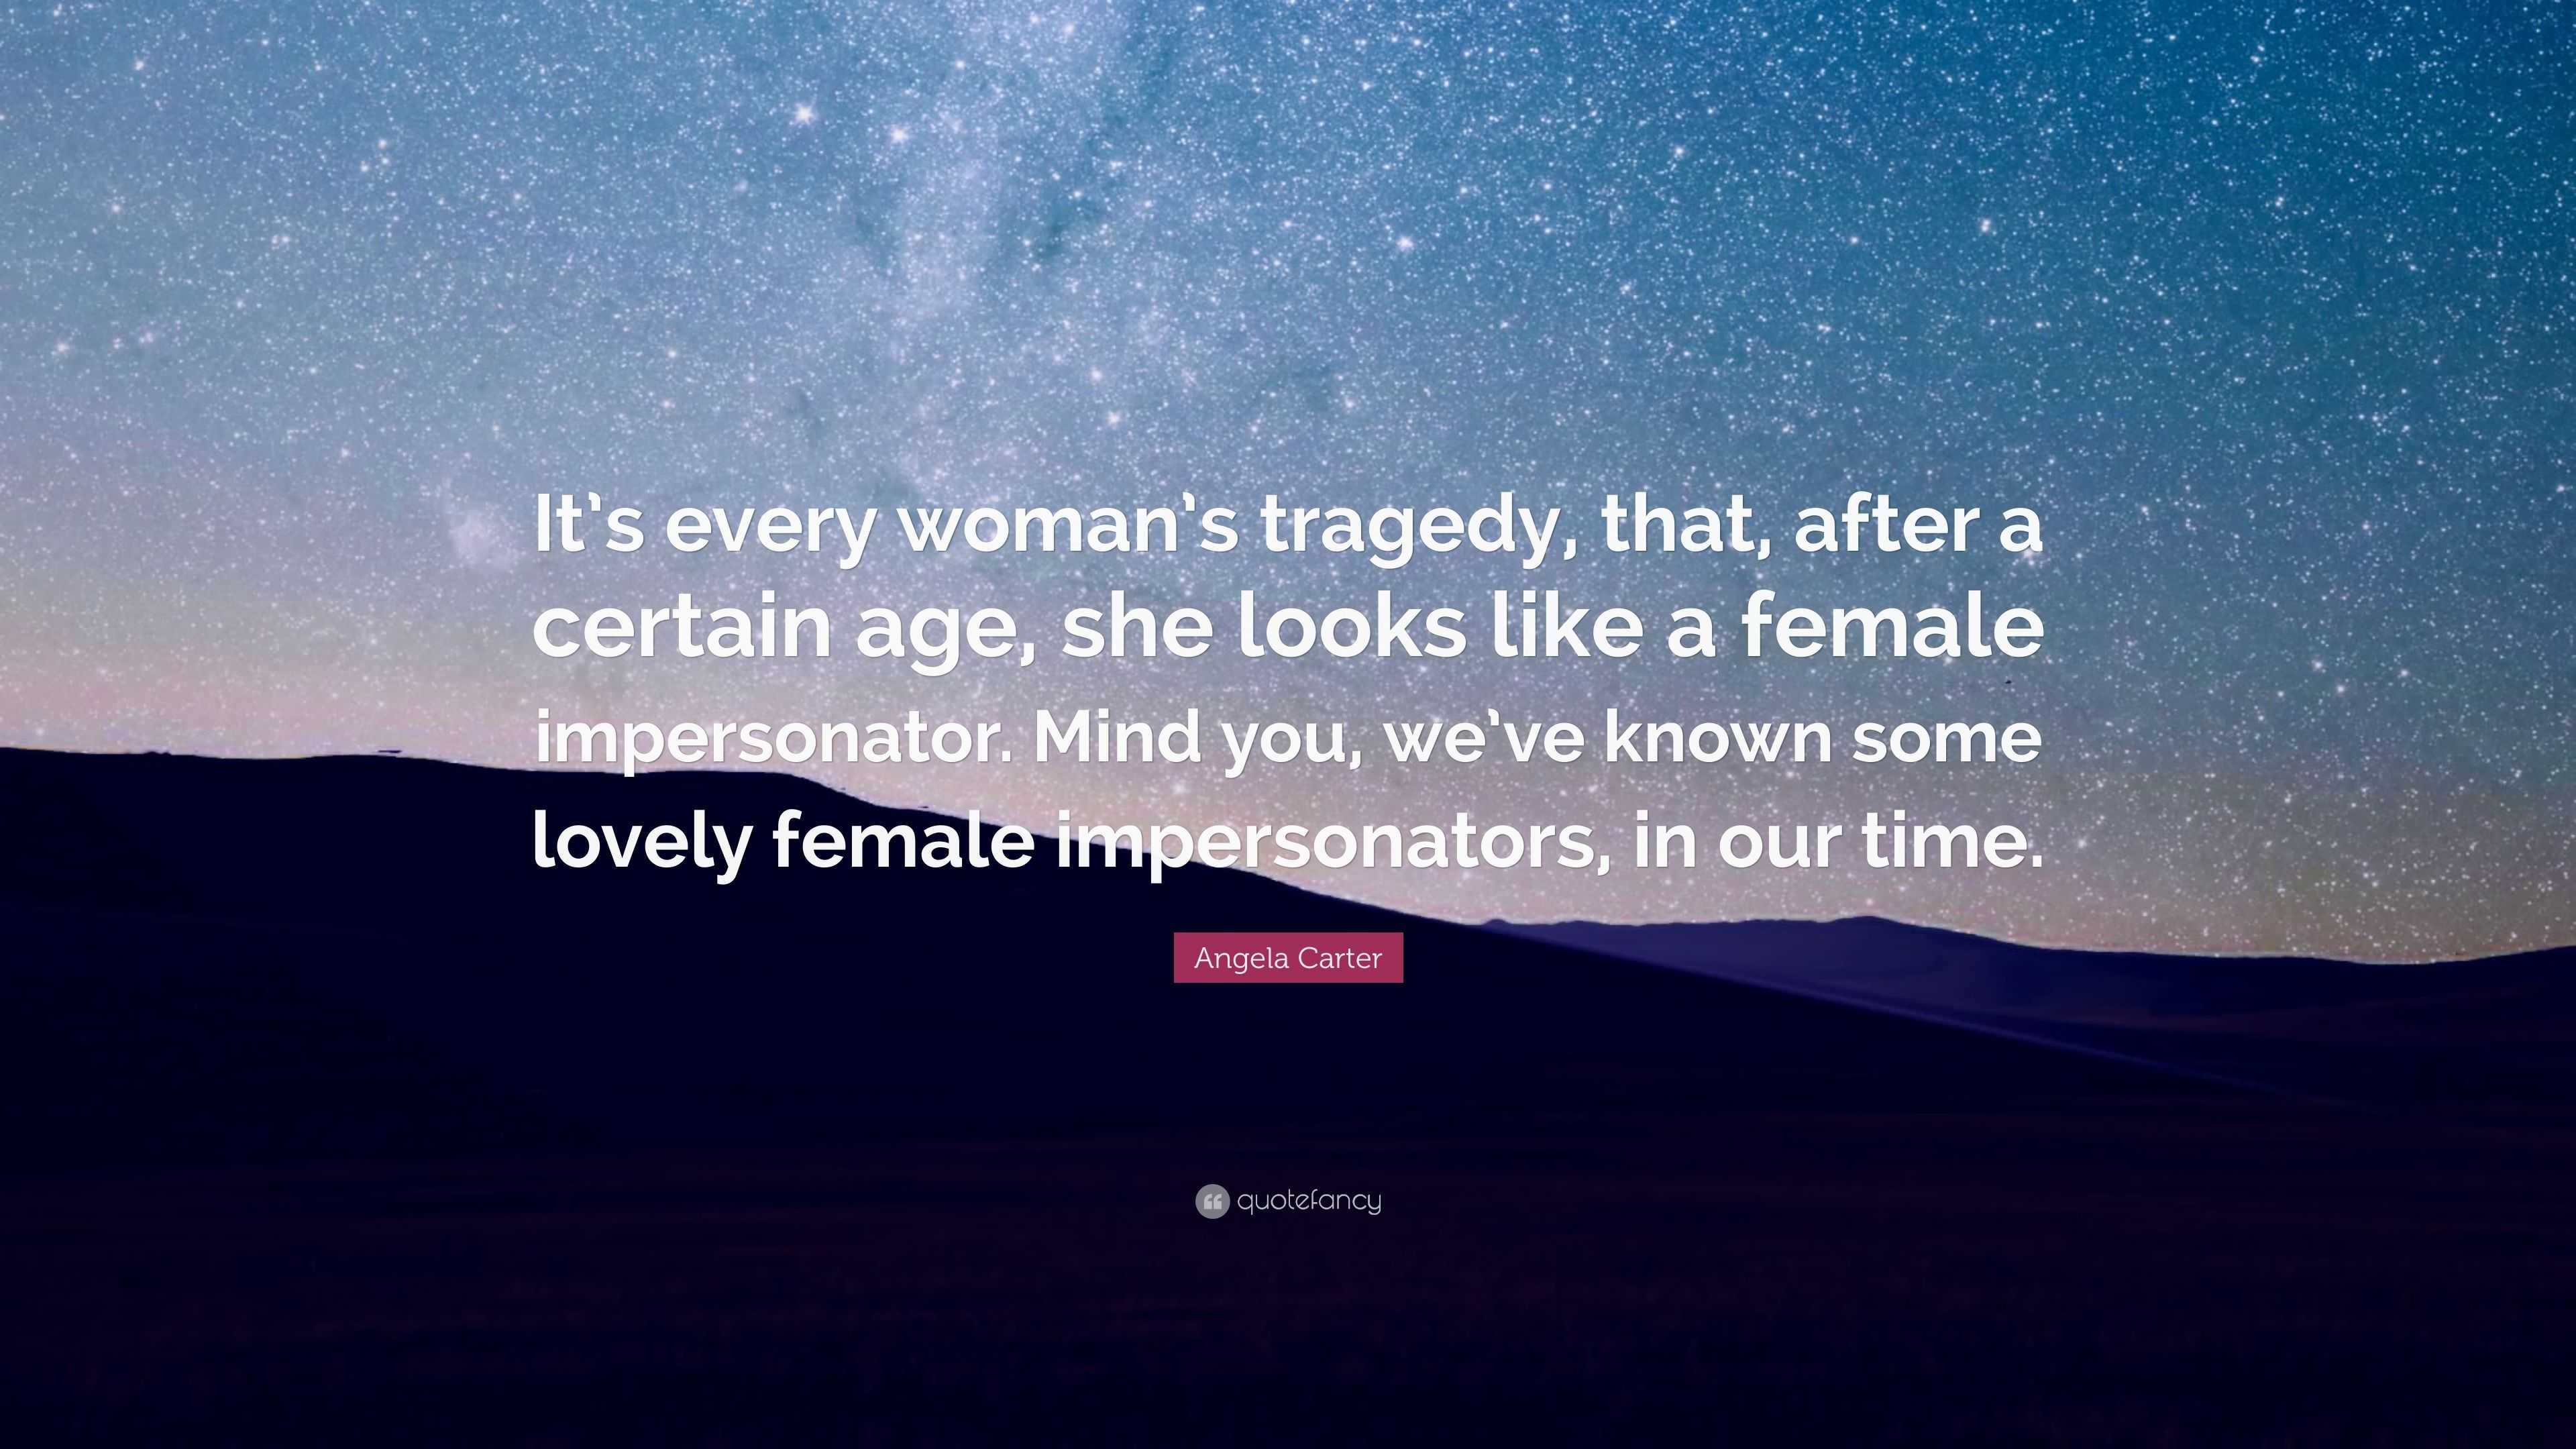 Angela Carter Quote: “It’s every woman’s tragedy, that, after a certain ...